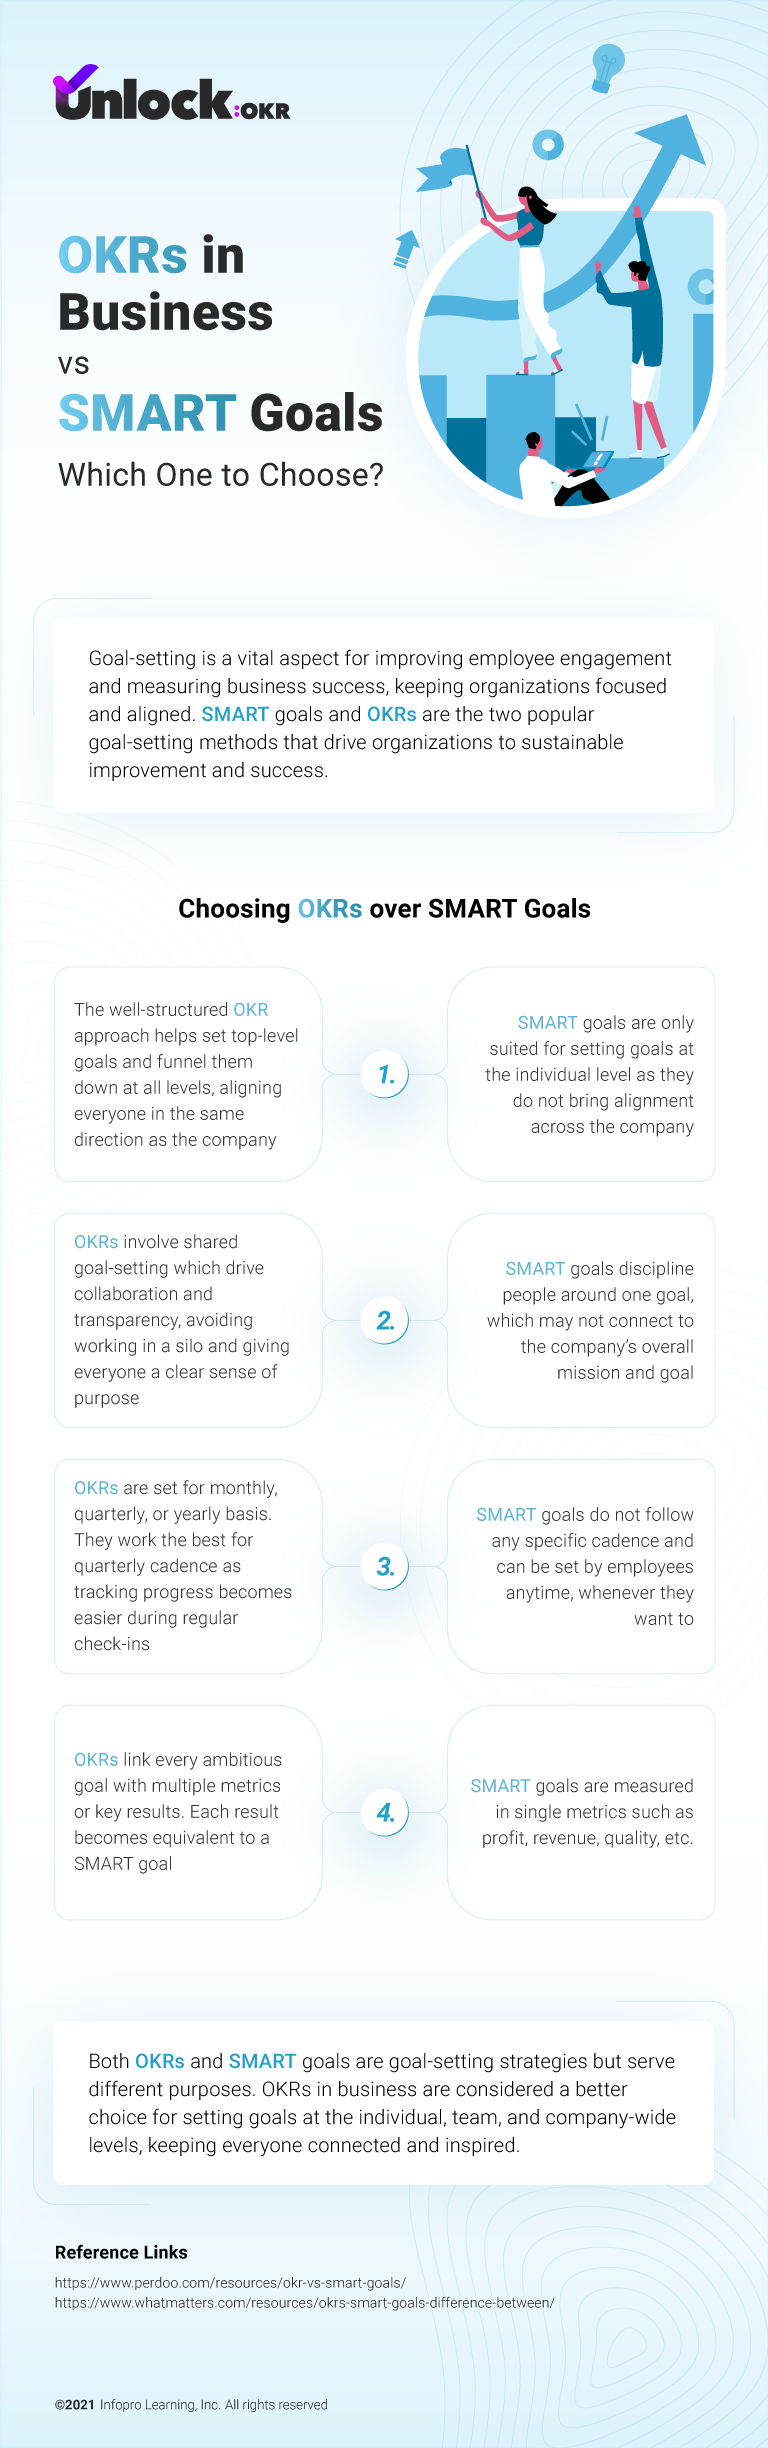 OKRs in Business Vs SMART Goals- Which One to Choose? 